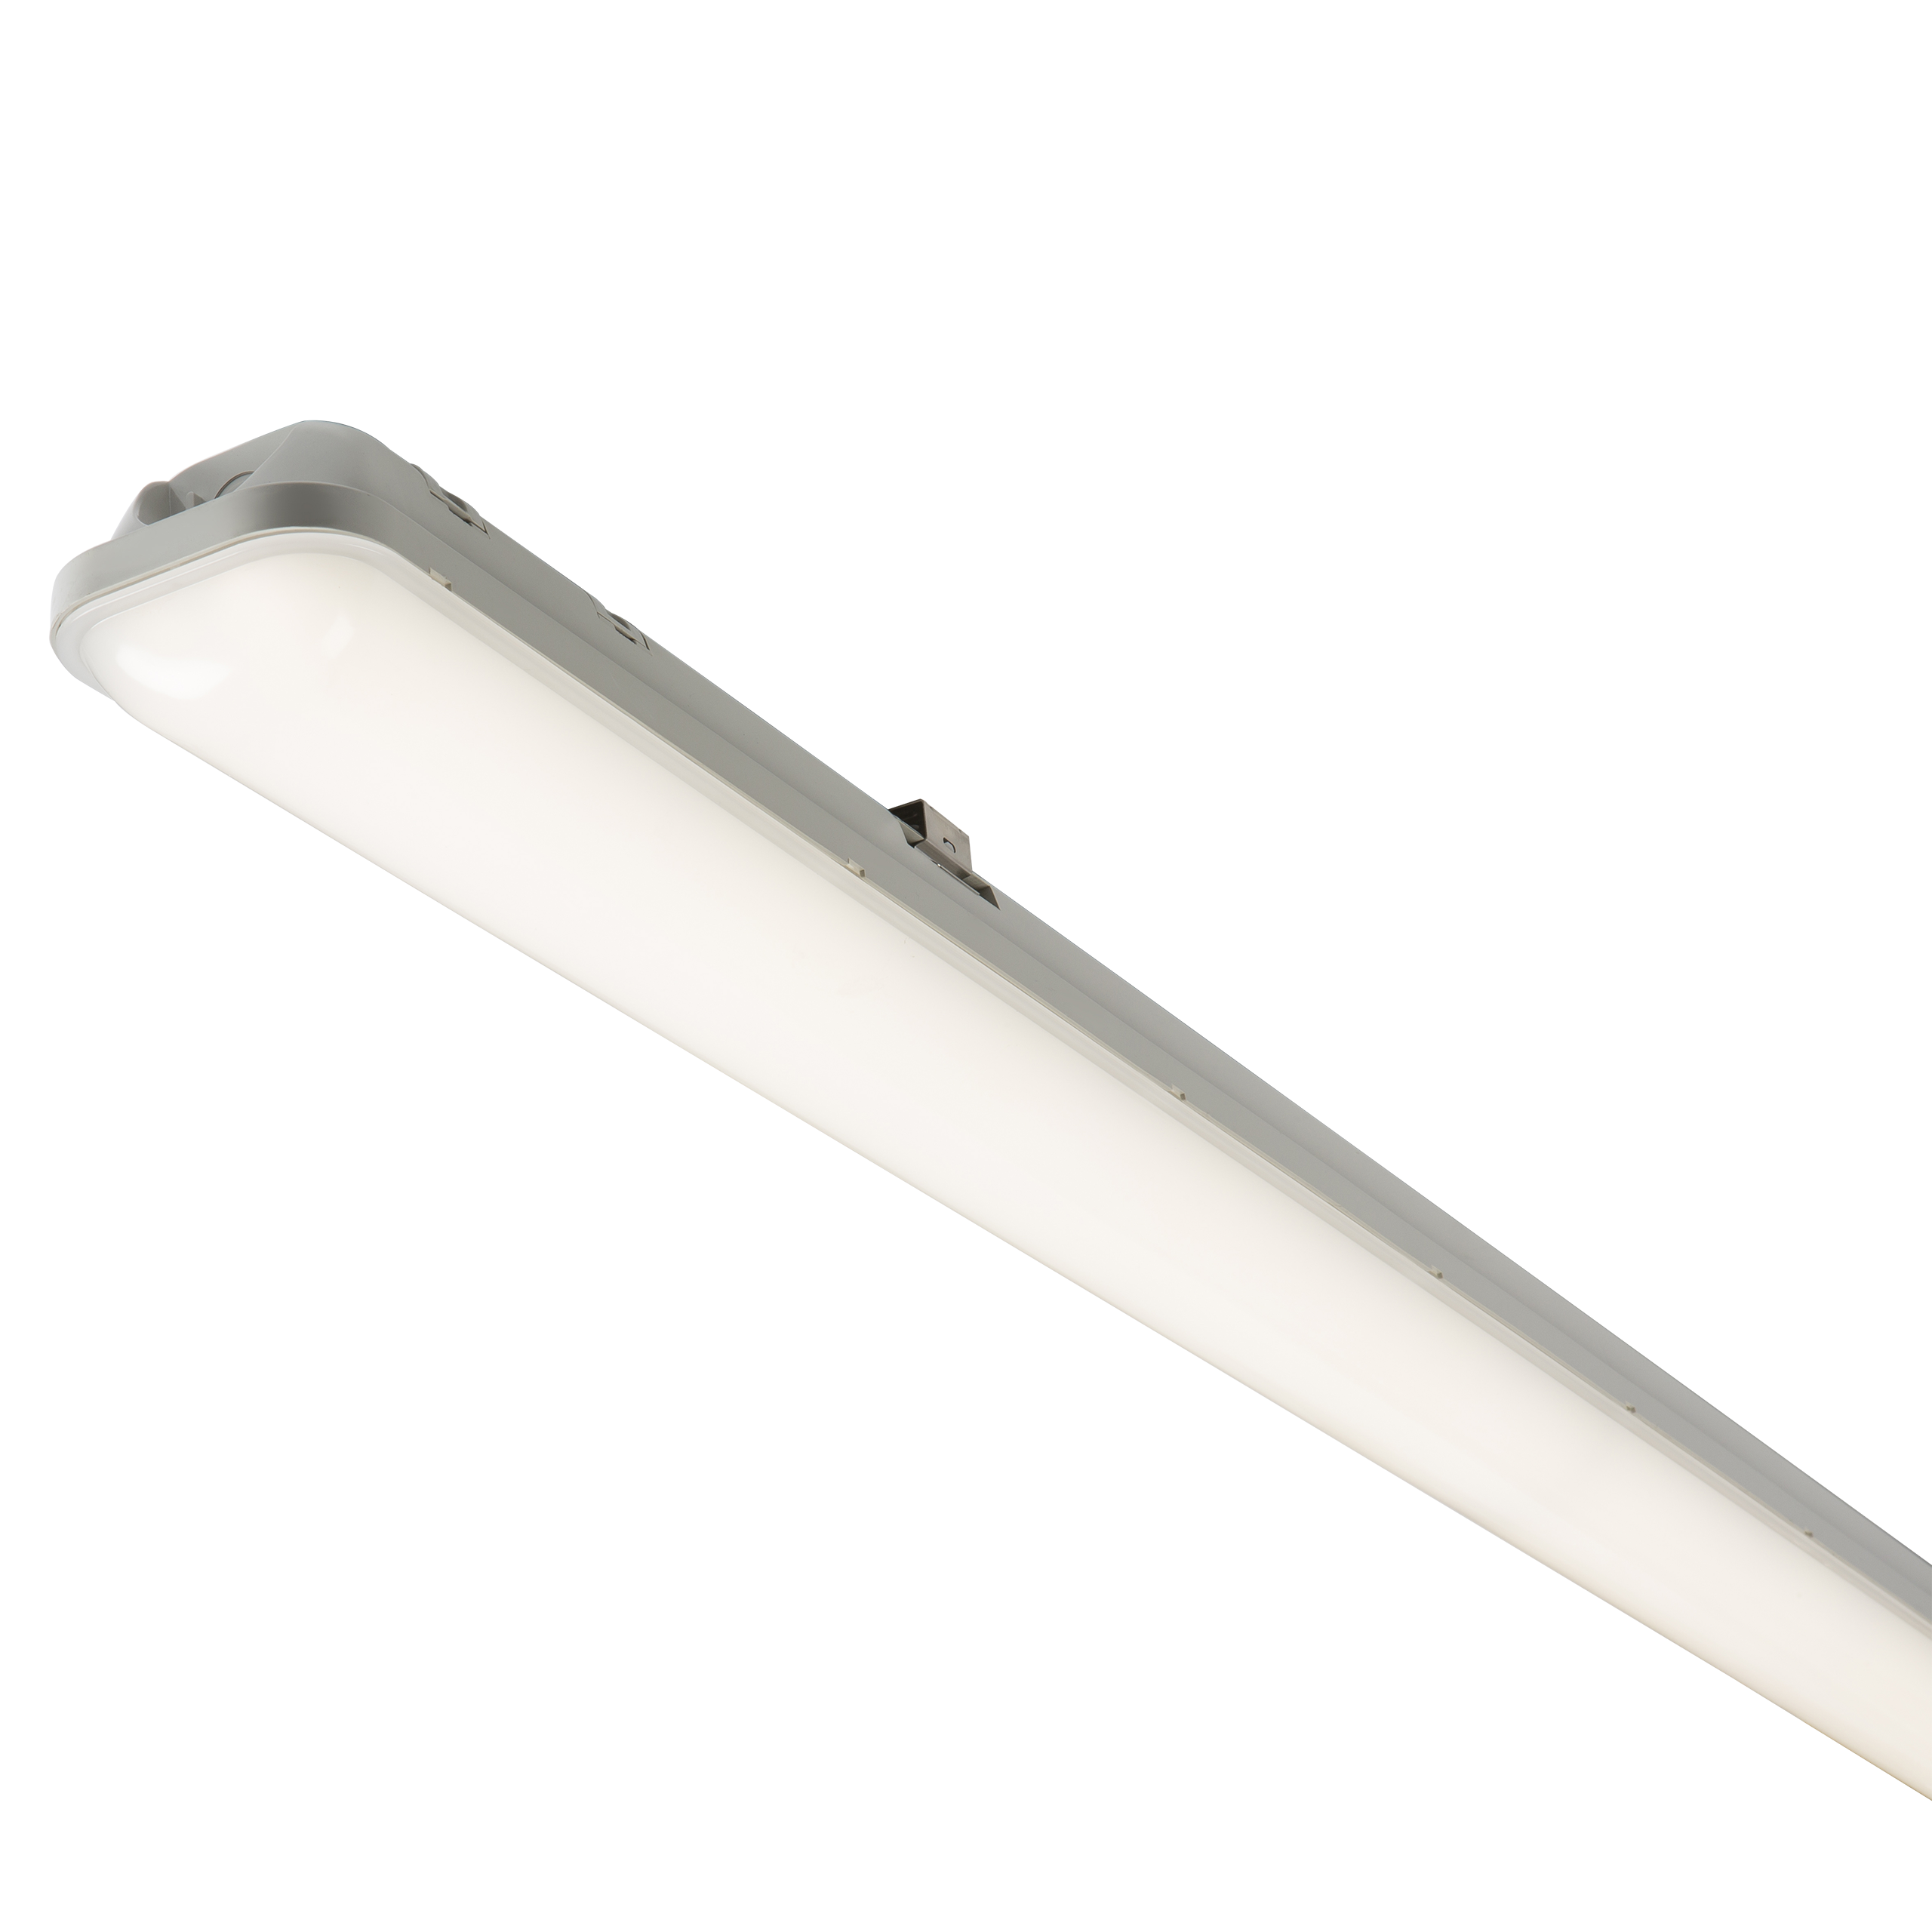 ML Accessories-NCLED36S 230V IP65 4ft 36W LED Non-Corrosive Fitting with Microwave Sensor - 1180mm